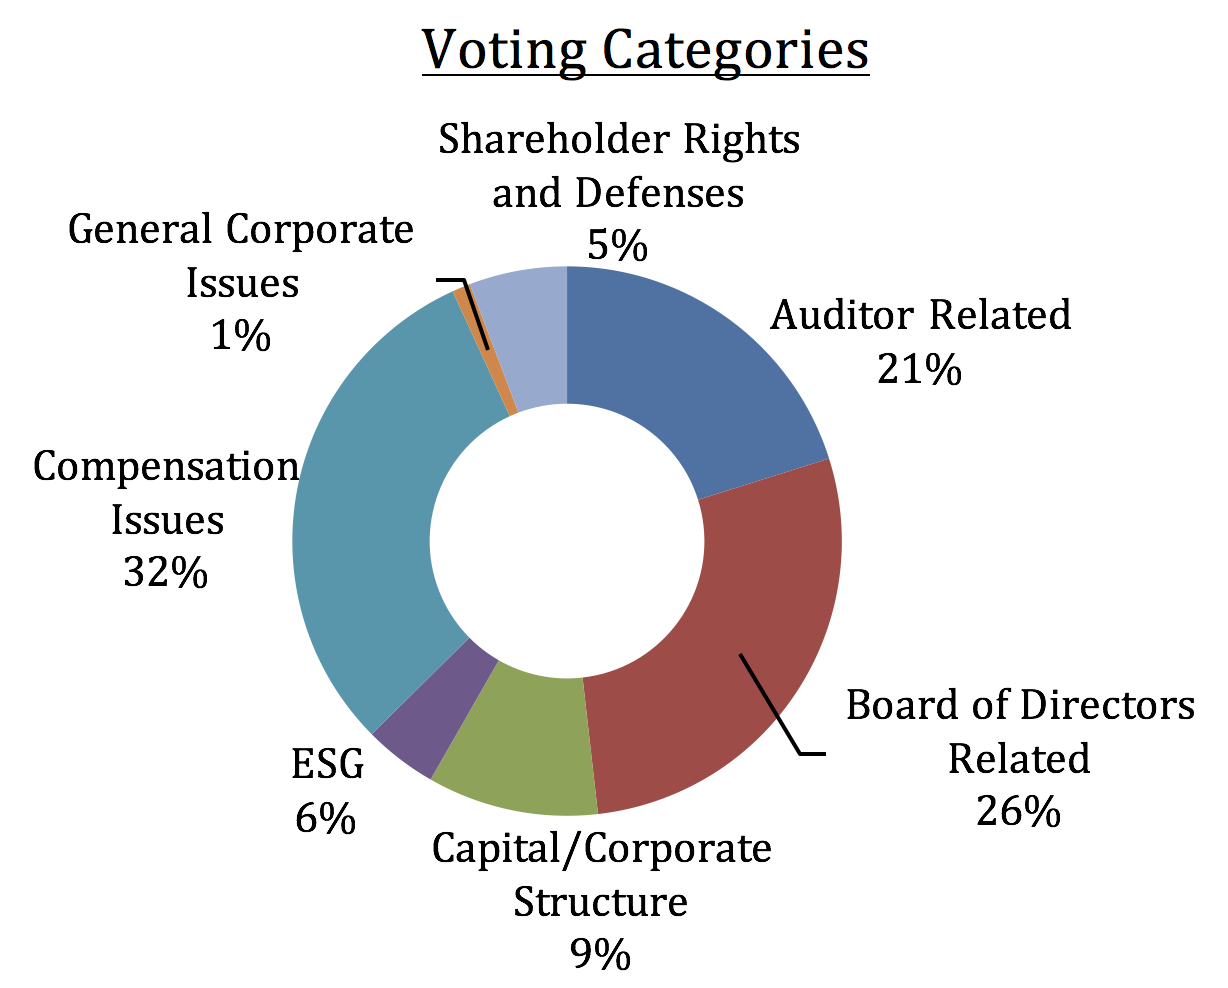 Pie chart of Voting Categories, with full text in caption below image.